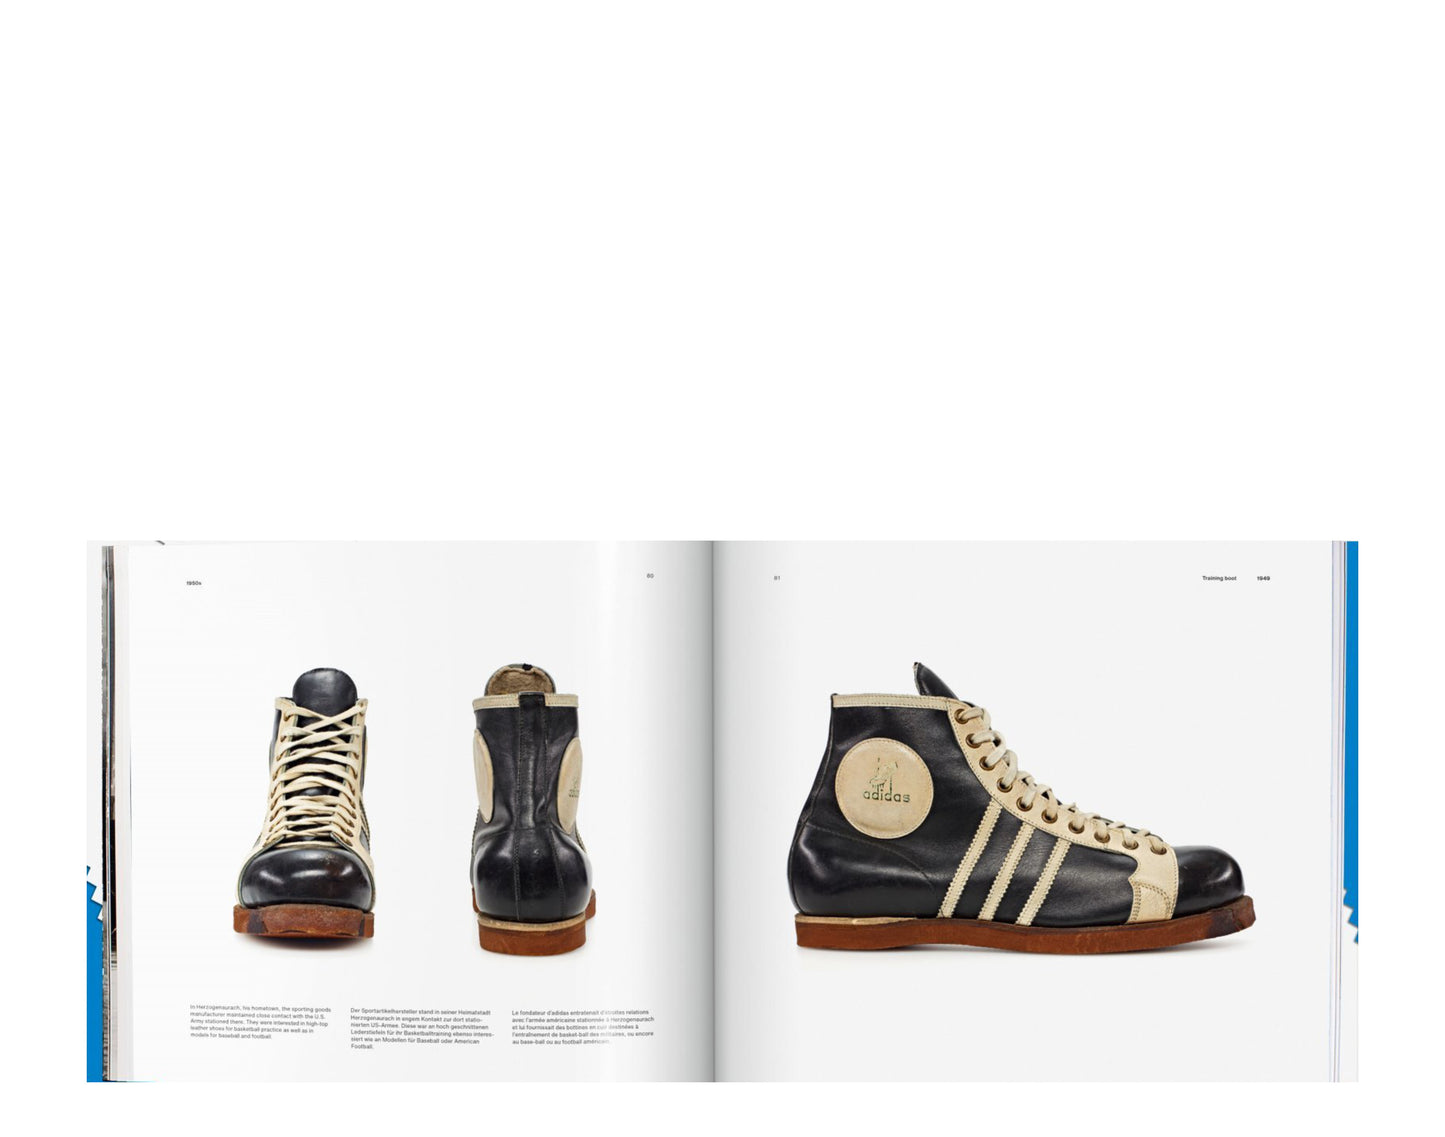 Taschen Books - The Adidas Archive - The Footwear Collection Hardcover Book